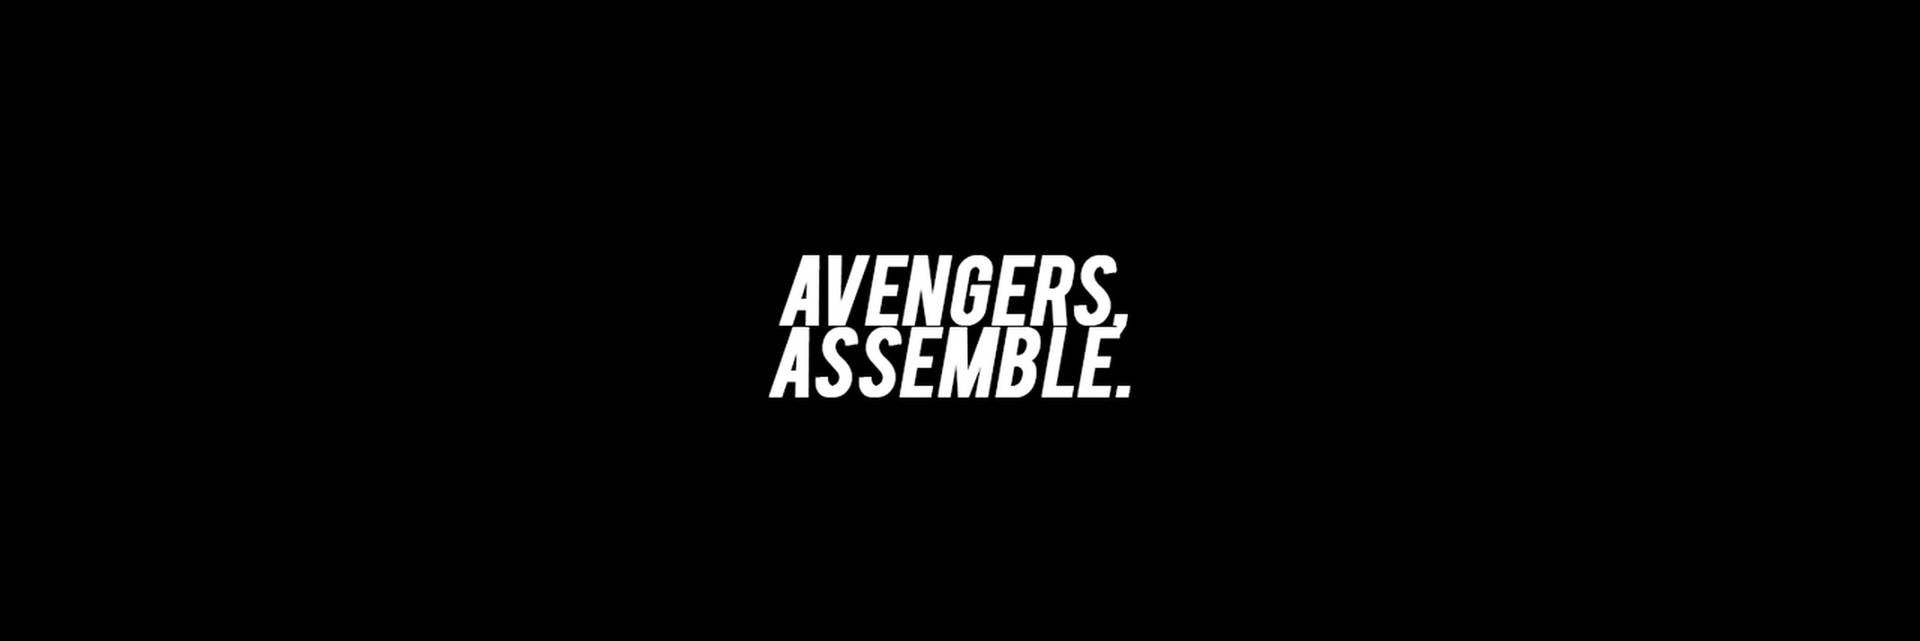 Avengers Assemble Black And White Background